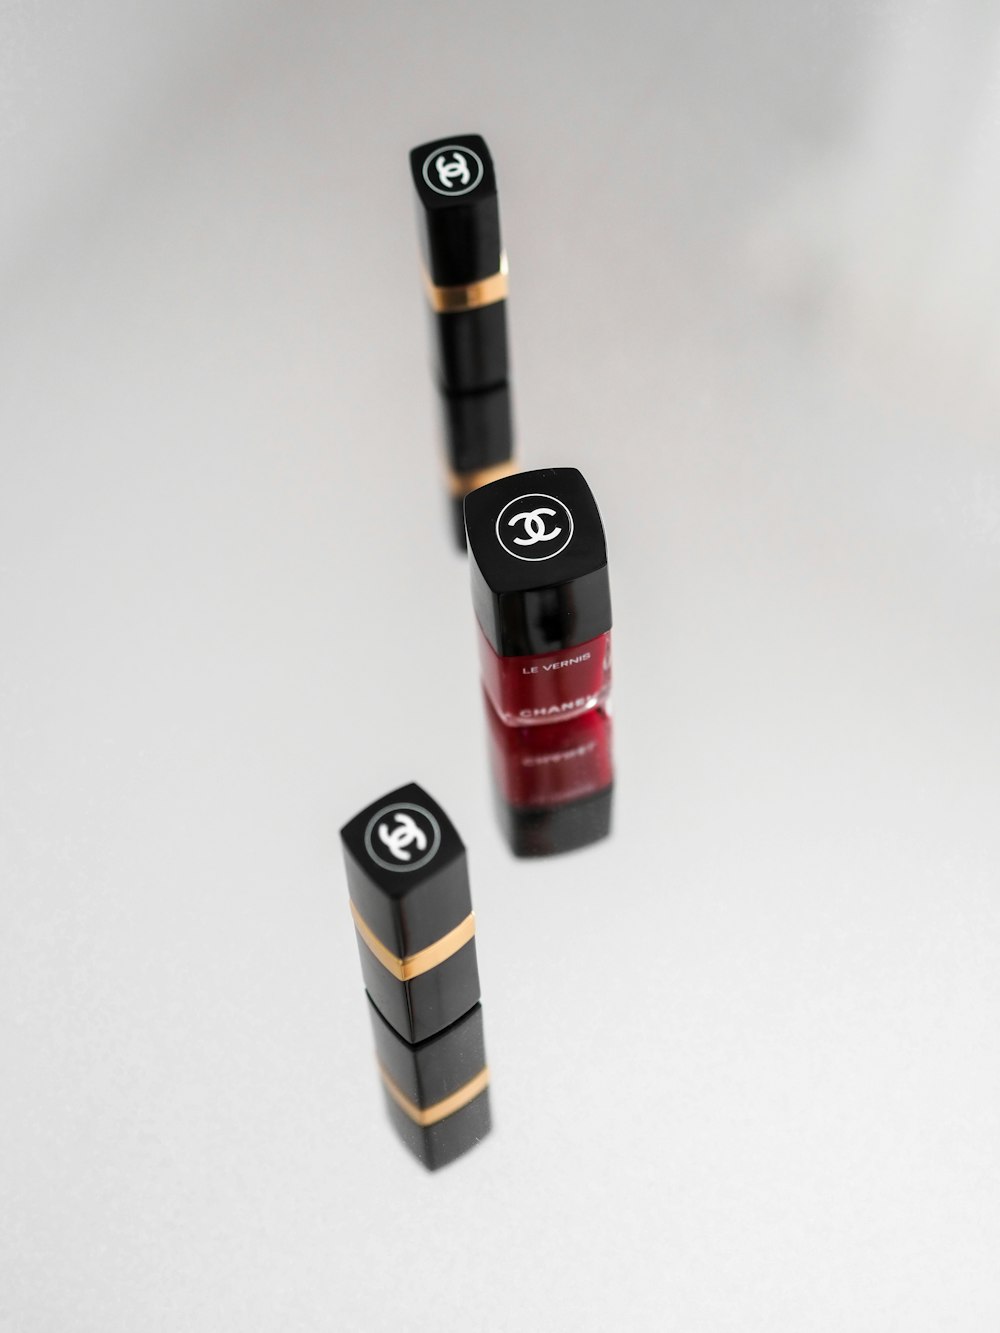 black and red tube type vaporizer